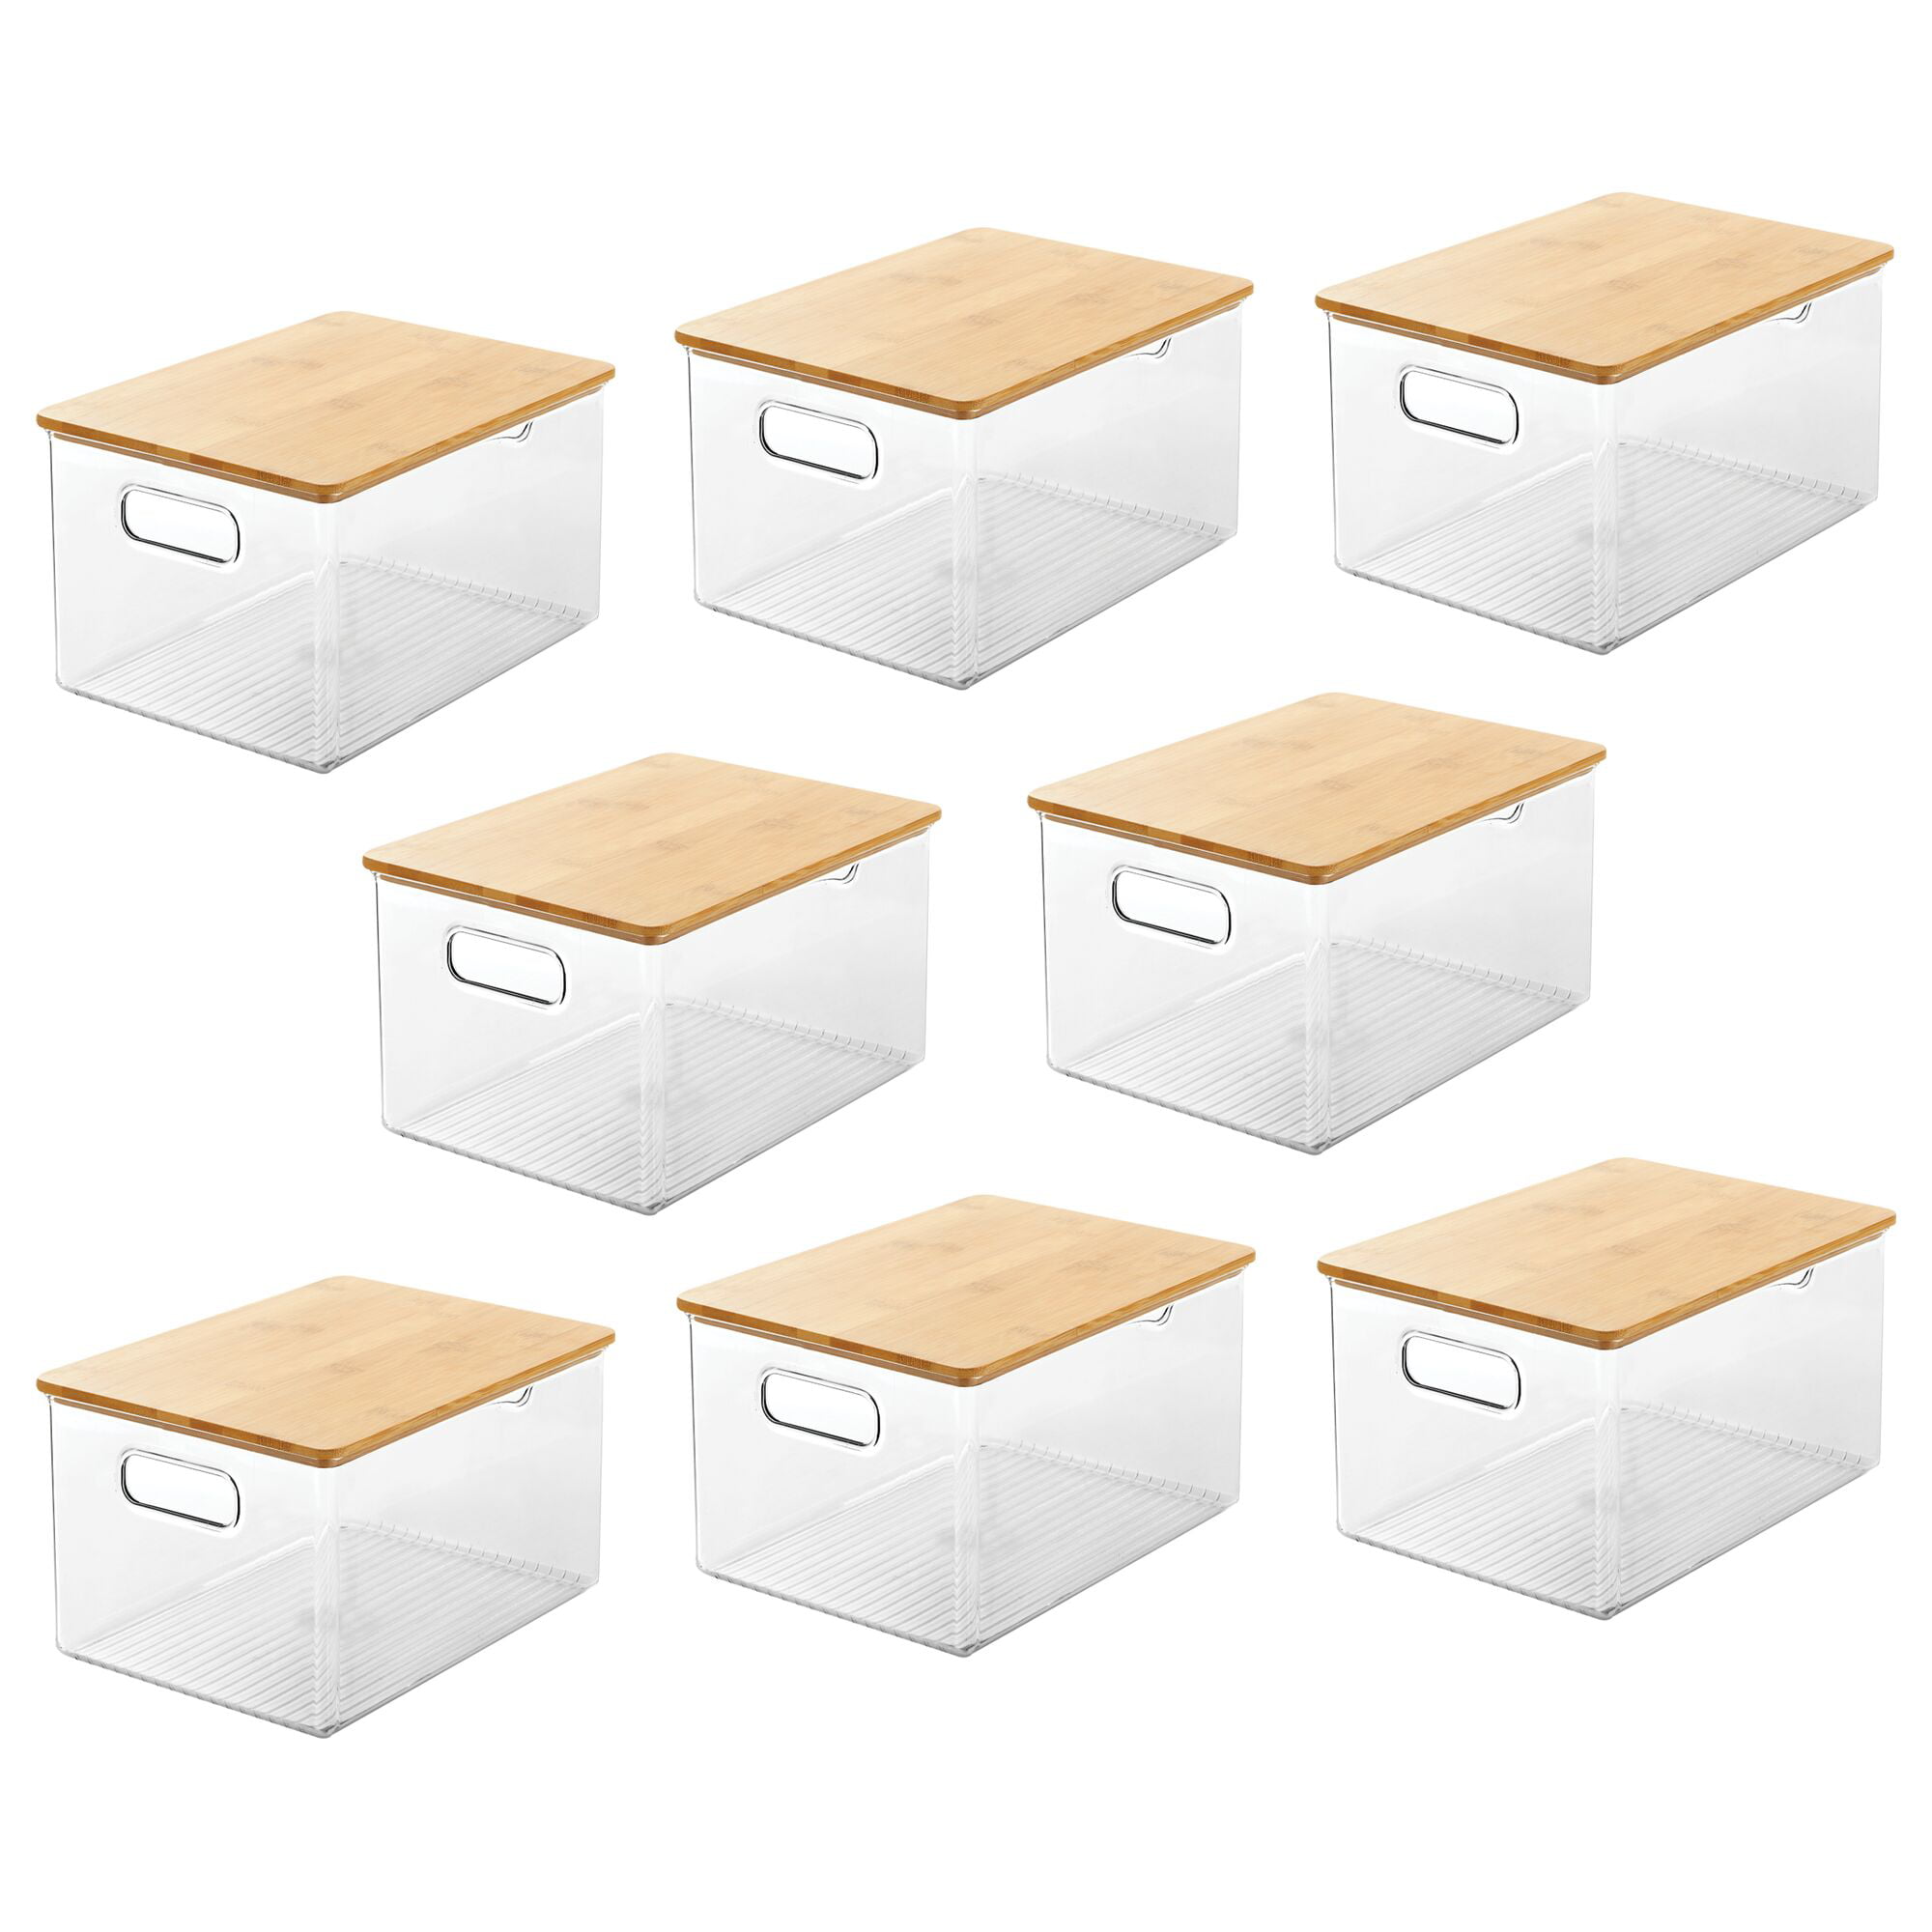 Member's Mark Multipurpose Storage Bins with Bamboo Lids - Set of 3,  Available in Small, Medium and Large